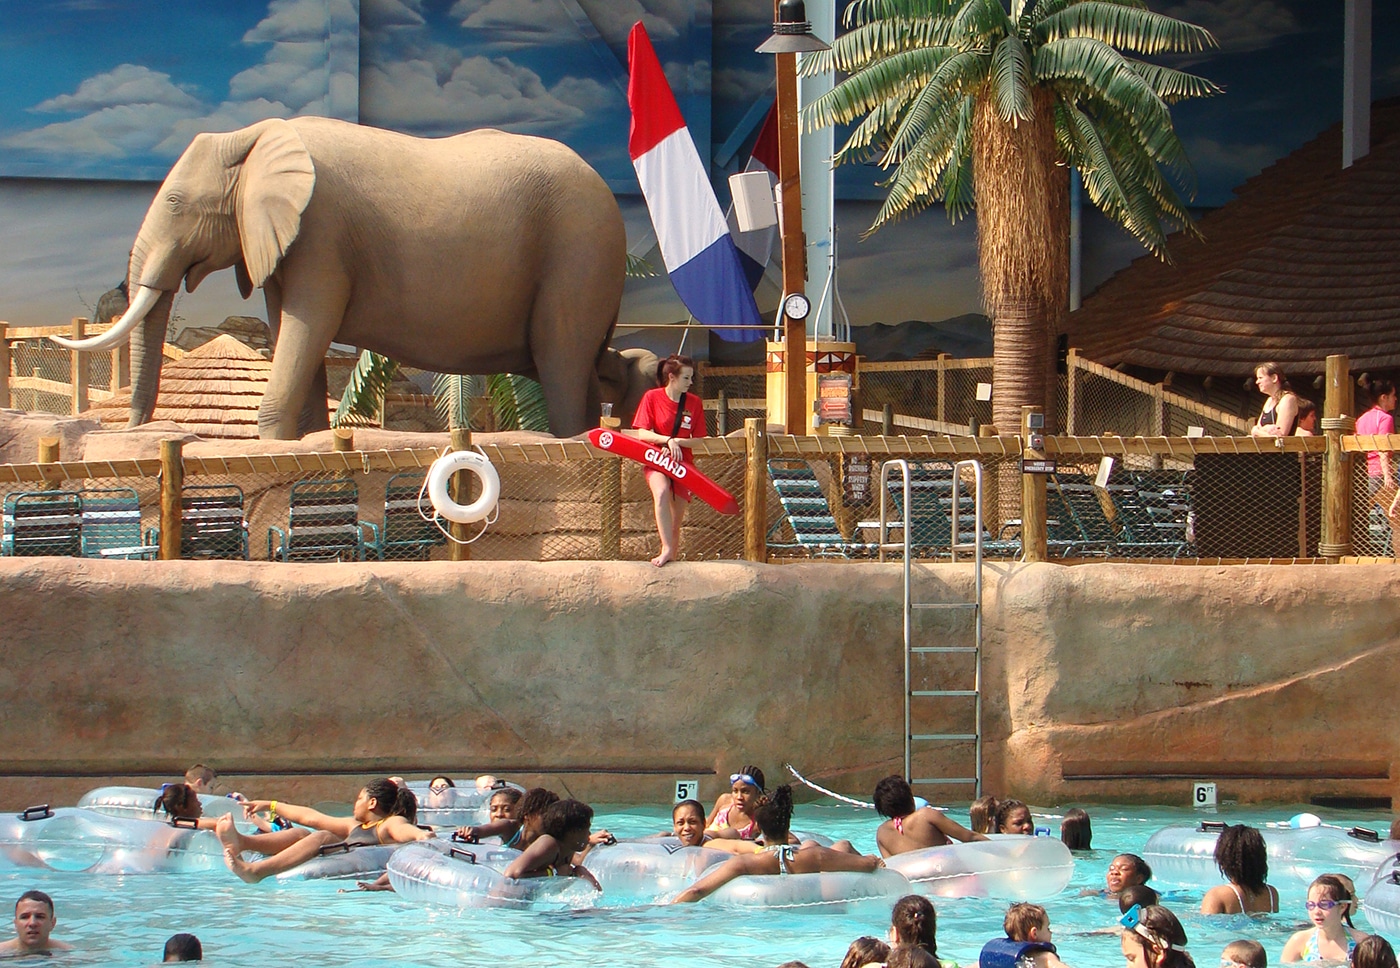 horizontal photo of the kalahari resort indoor water park showing a life size elephant model and a pool with people swimming